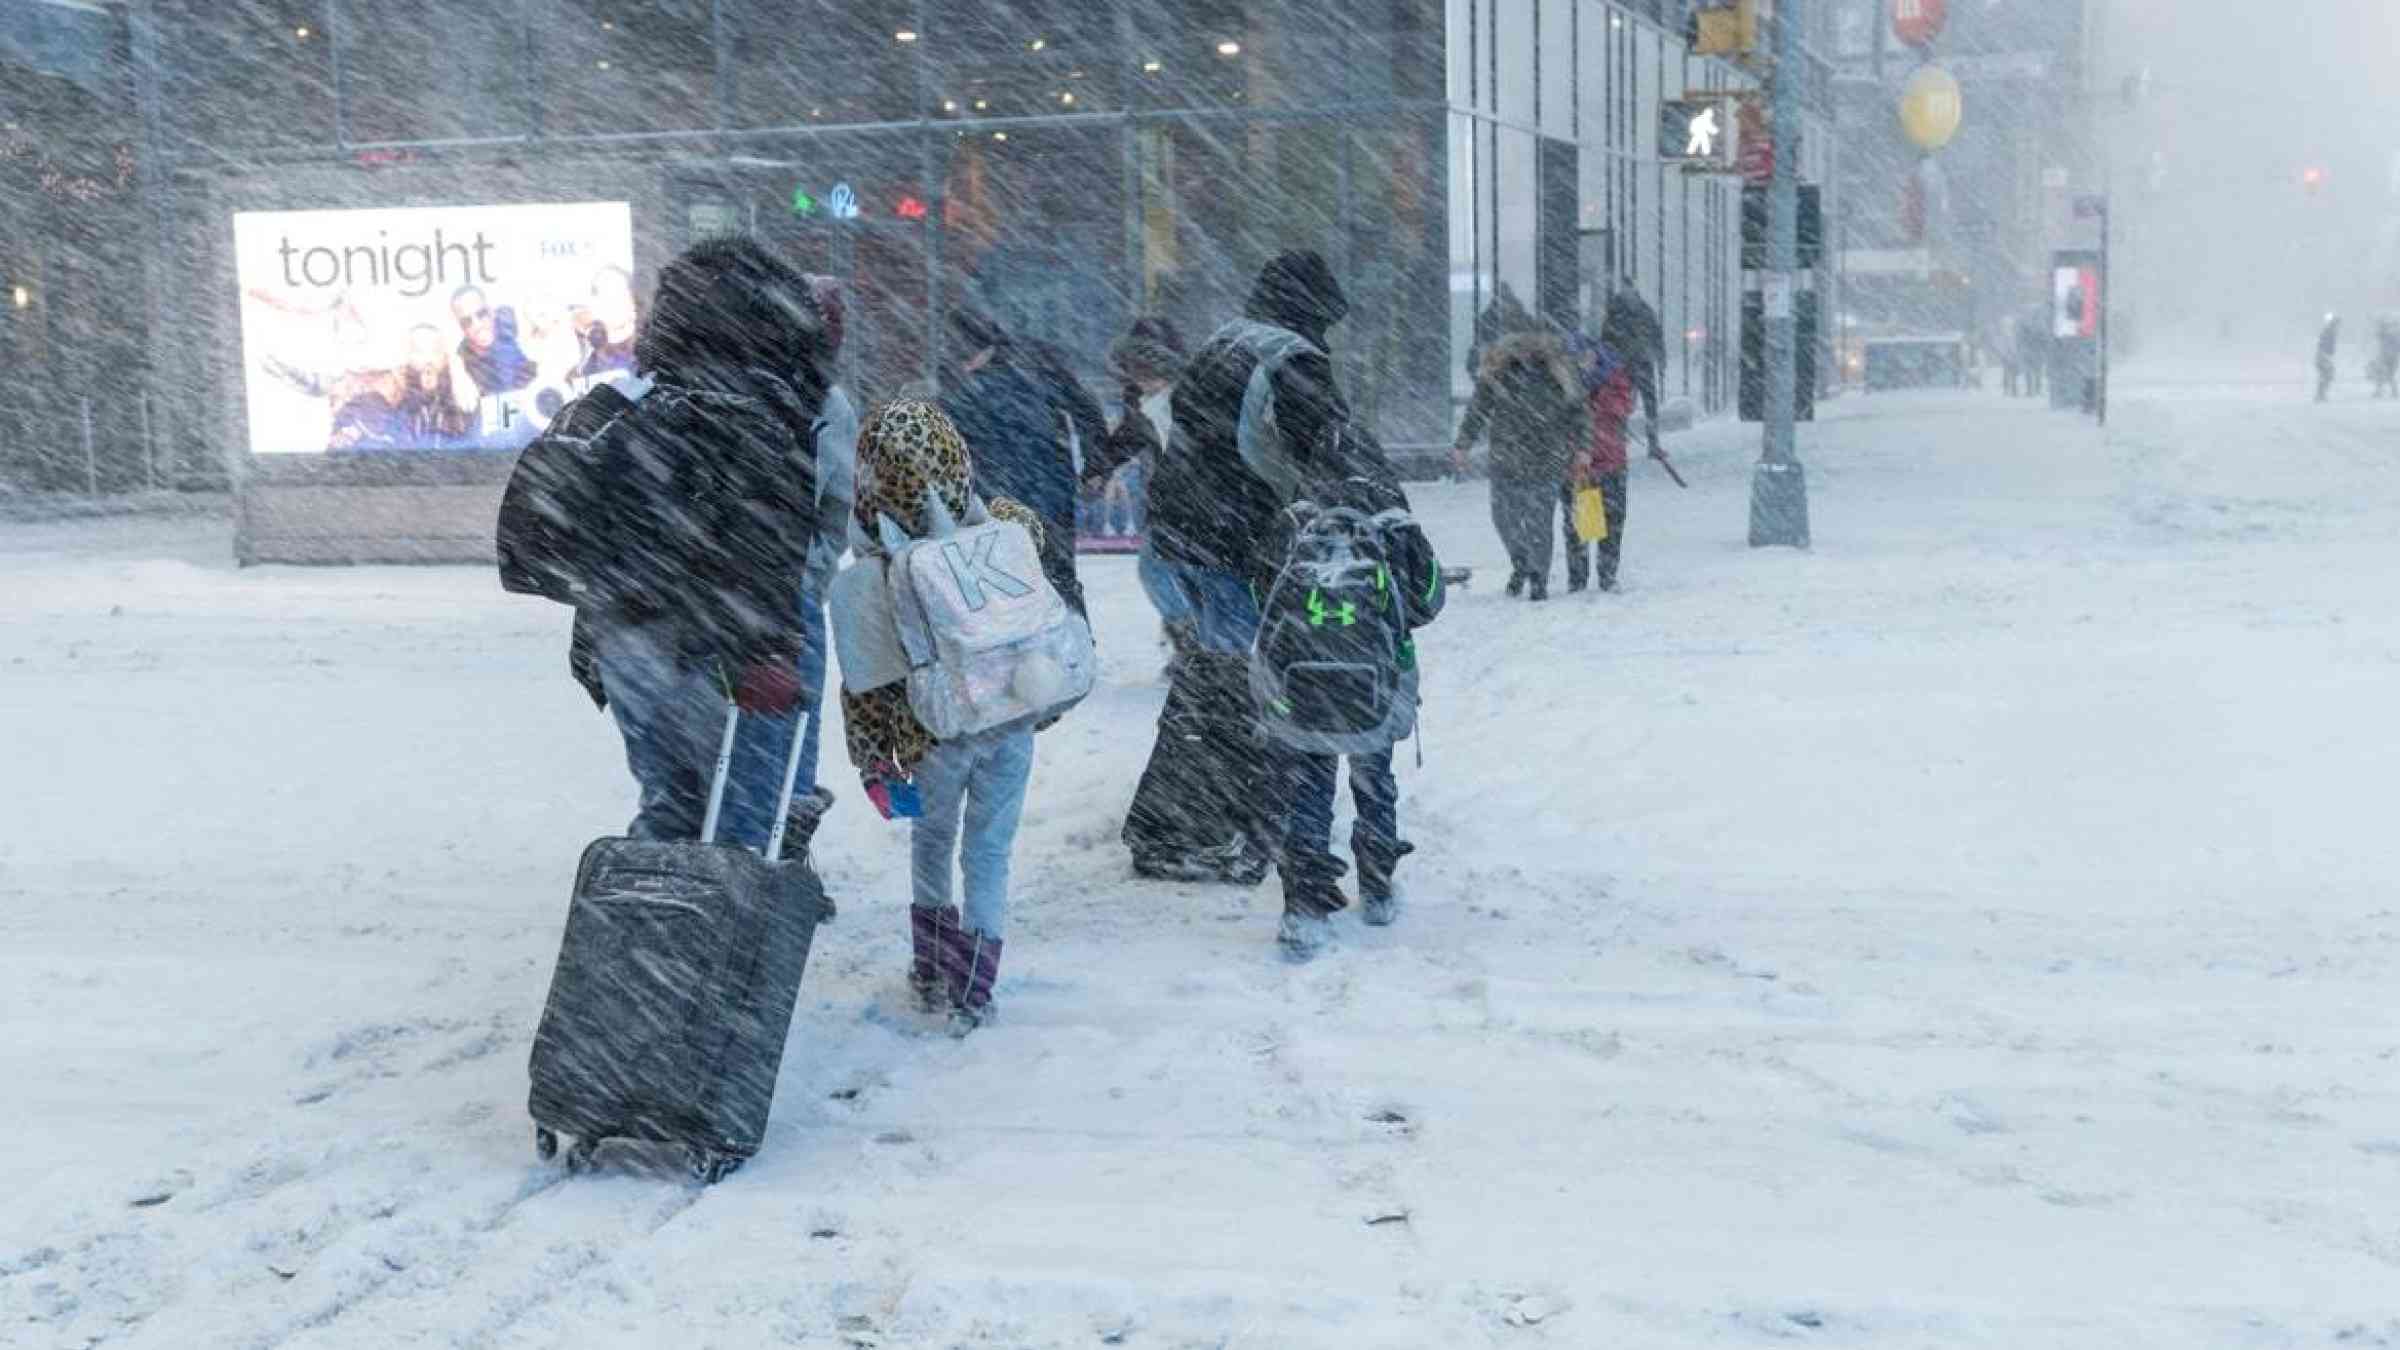 Pedestrians cross a snow-covered street during a blizzard in New York